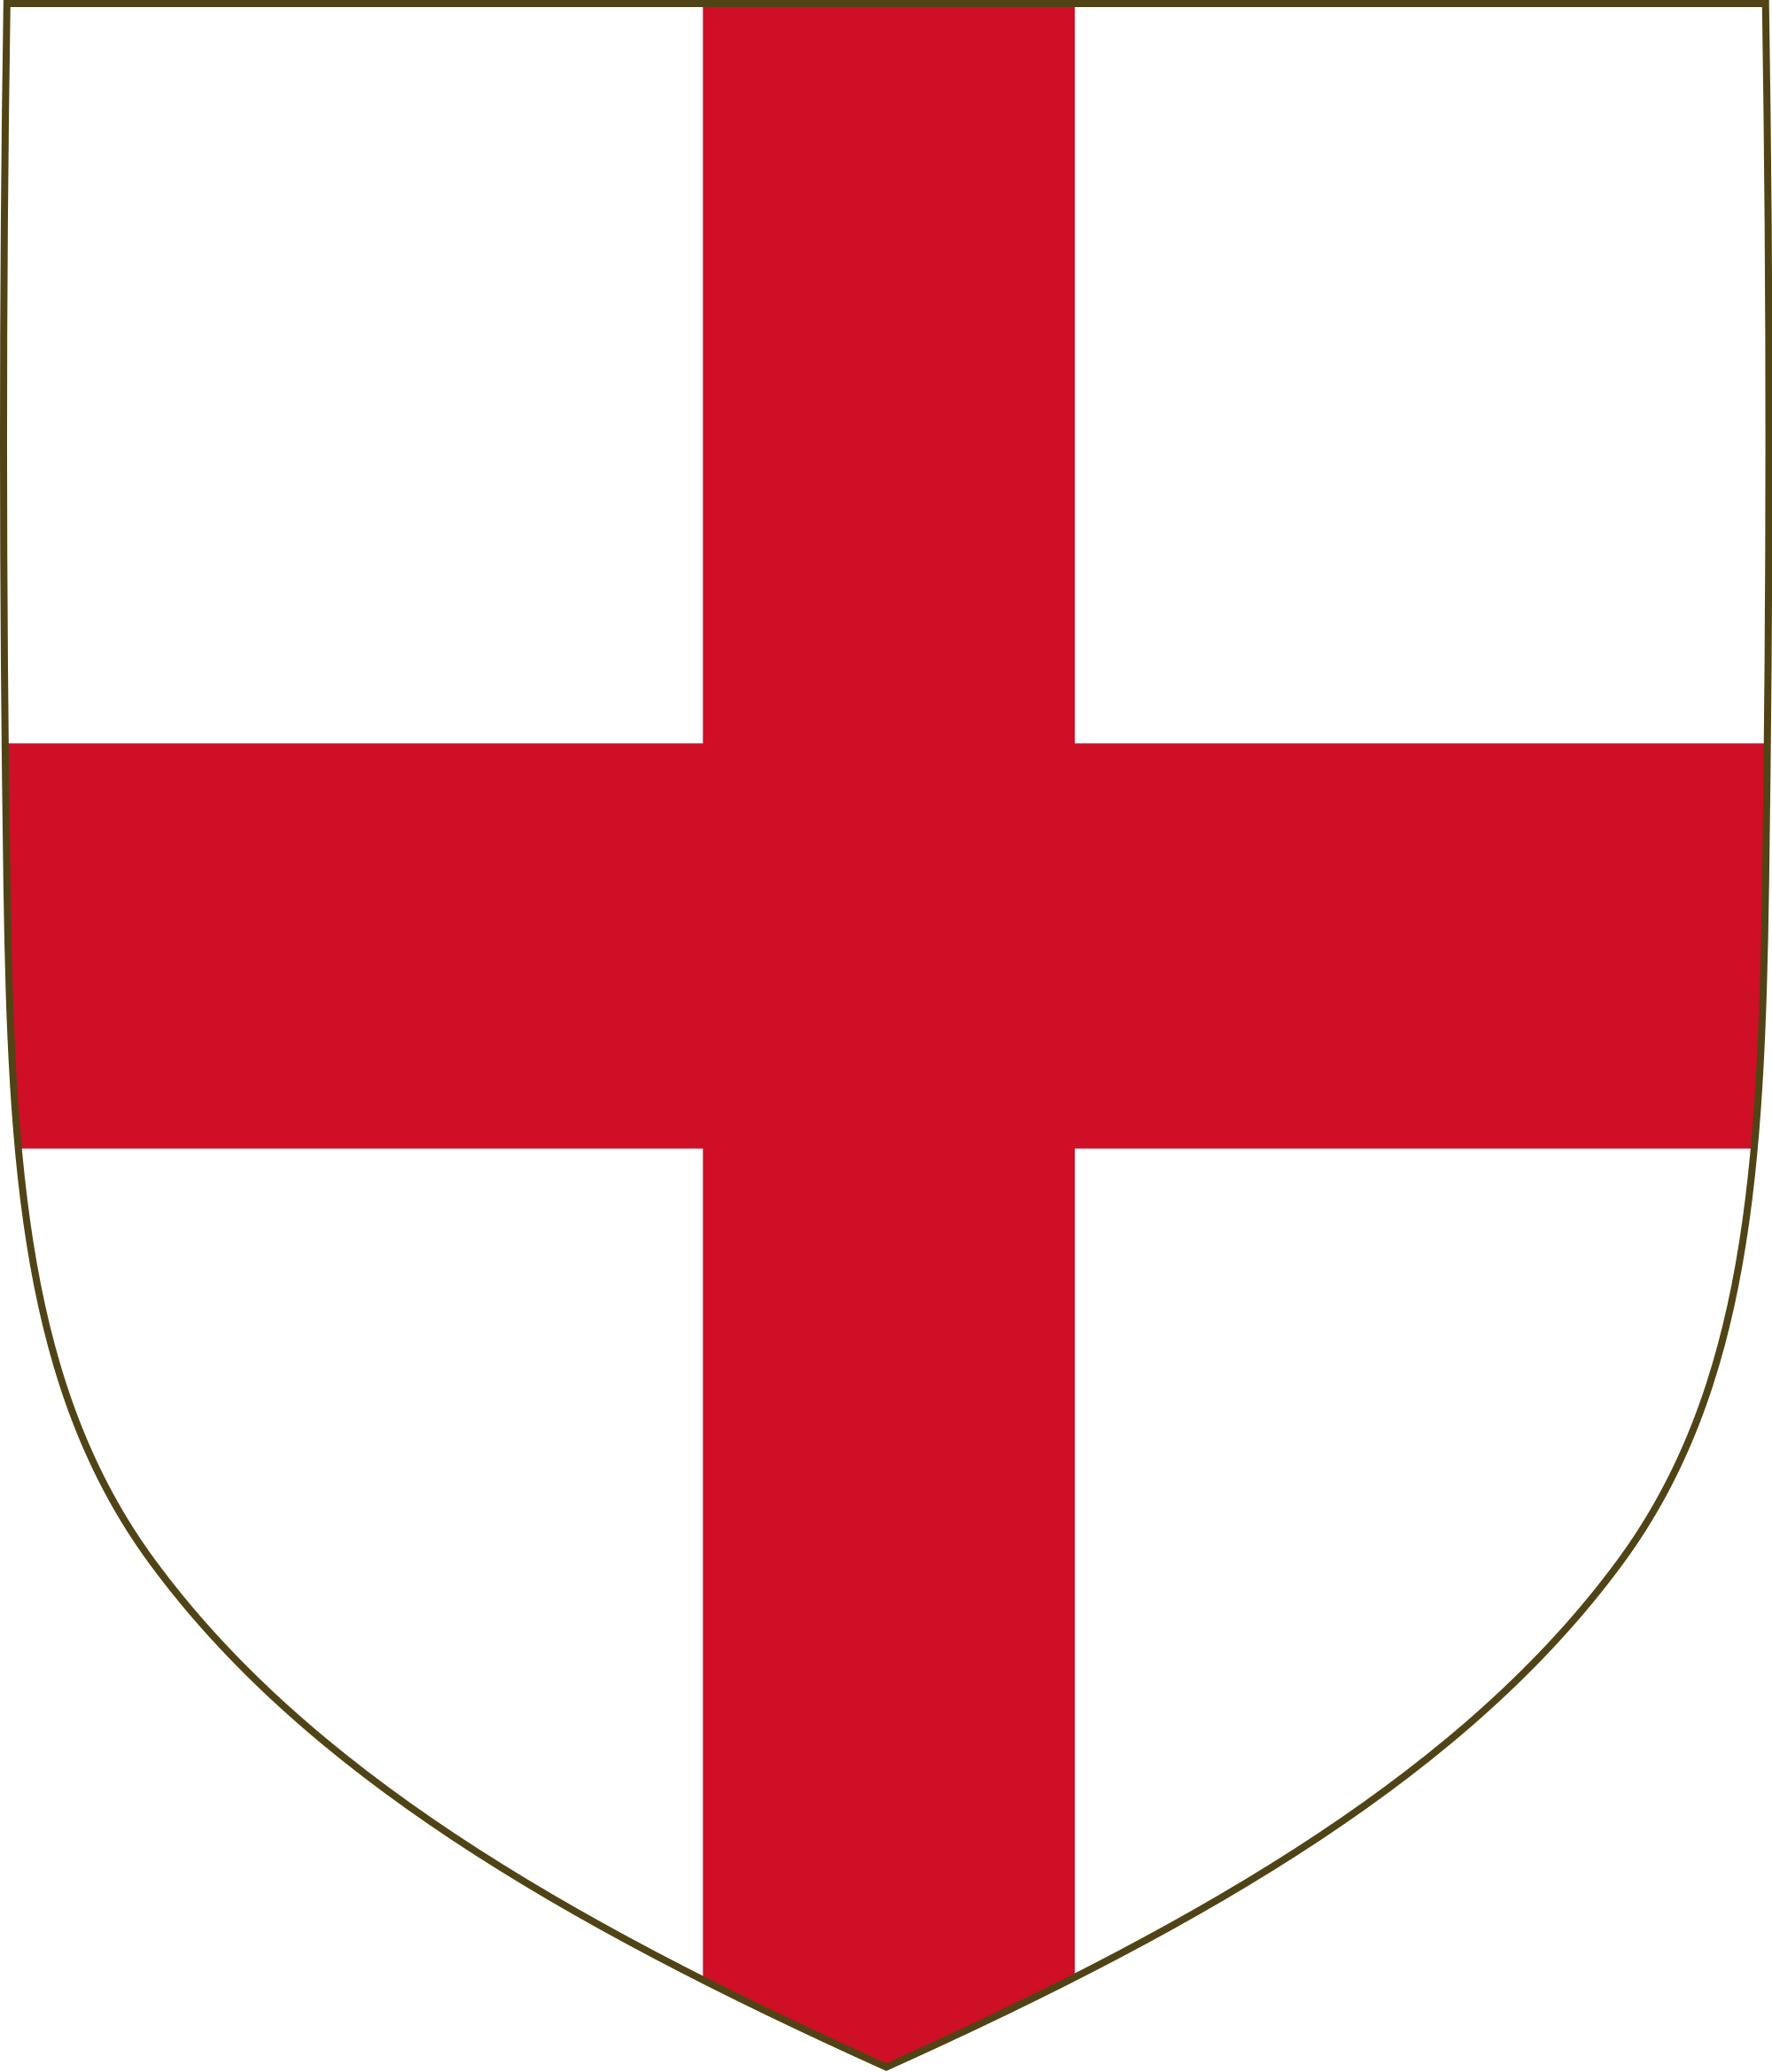 Red Cross in Shield Logo - File:Red cross of England.svg - Wikimedia Commons